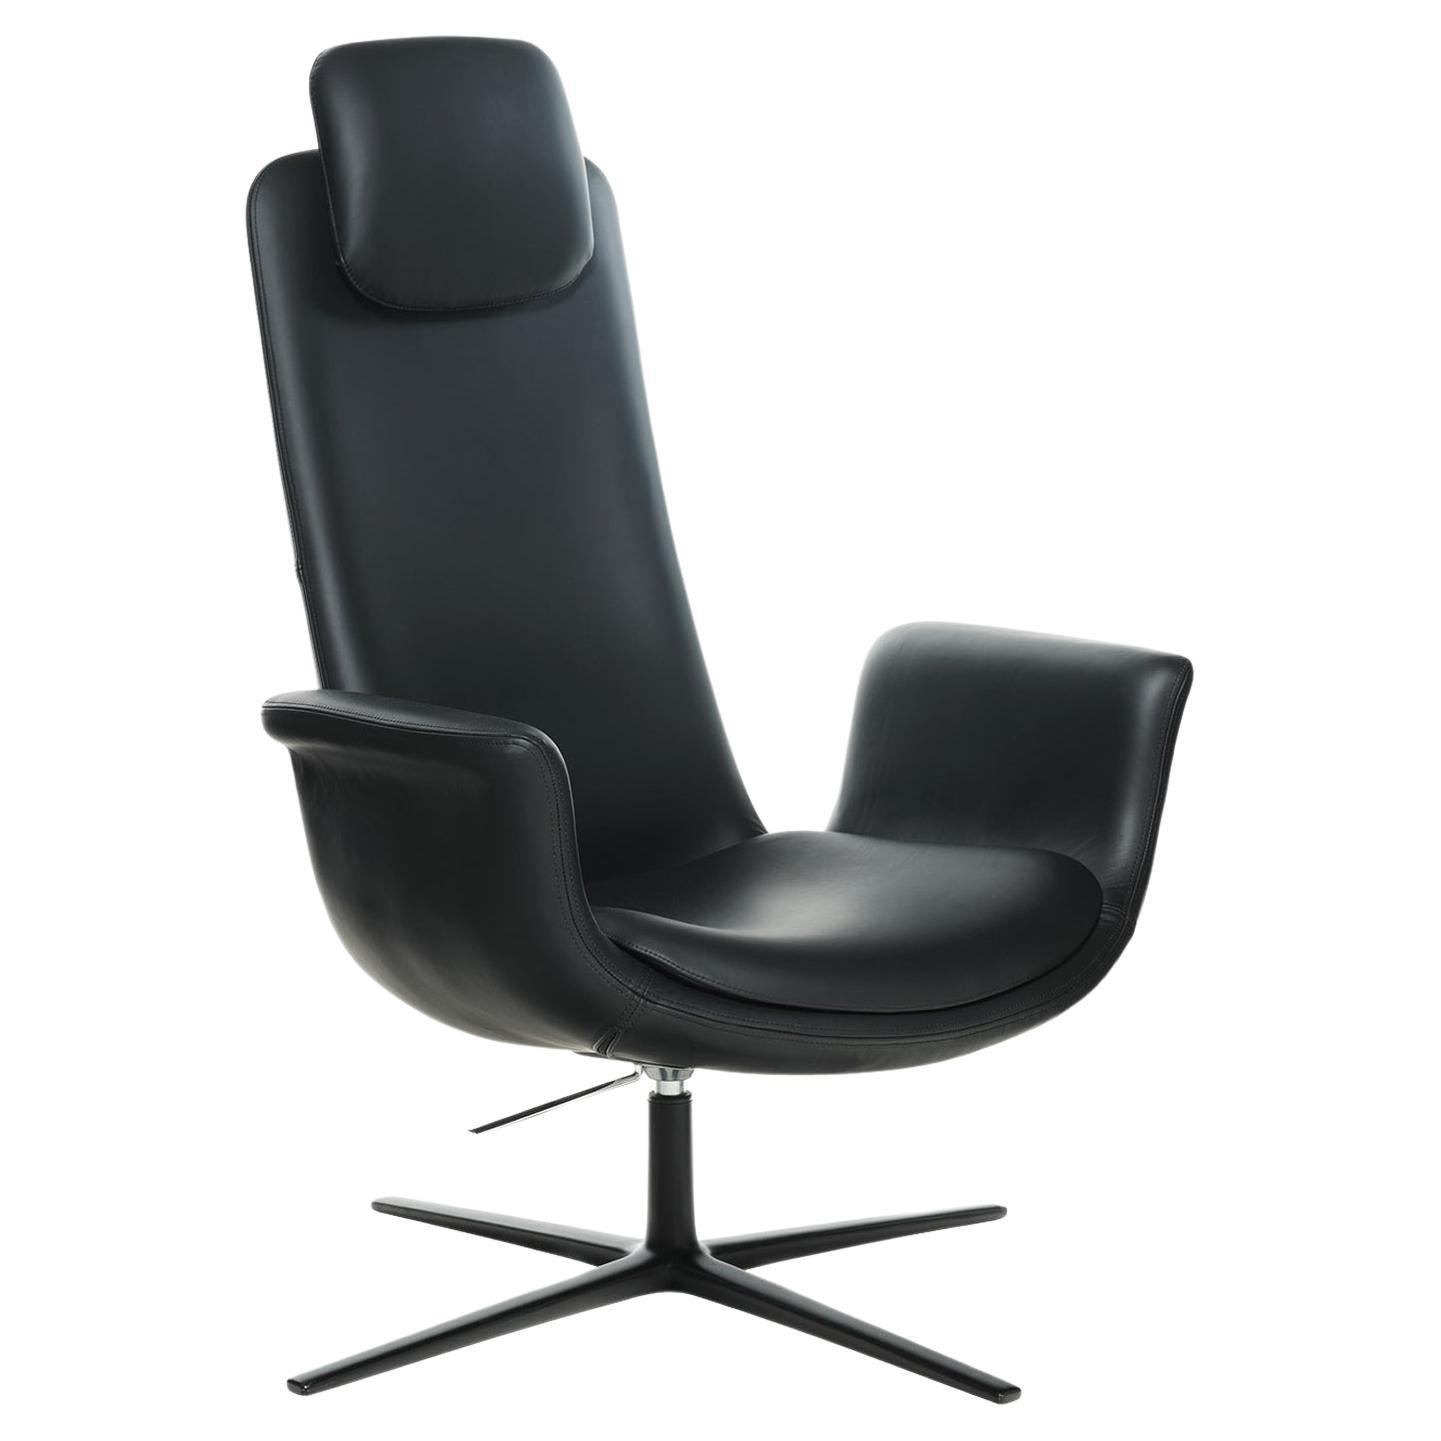 Armchair Office or Club Chair  "Odyssey" black leather fabric by Eugeni Quitllet